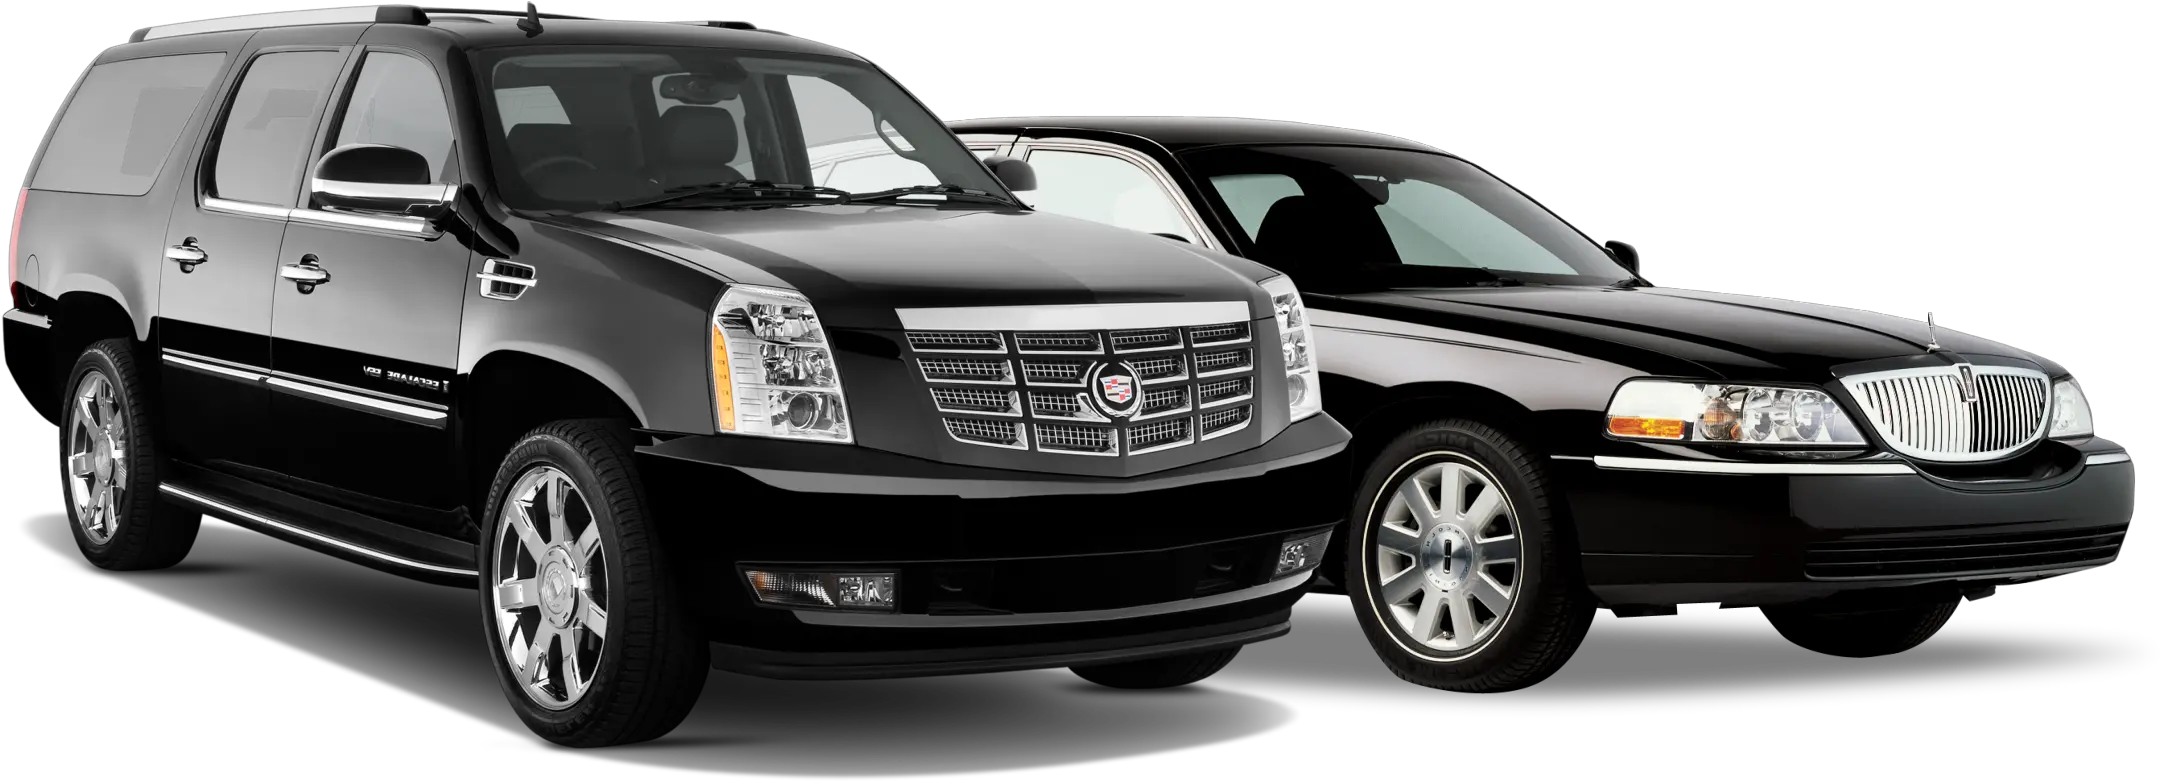 Taxi Aa American Cab And Limousine Lincoln Town Car Black Png Limo Png